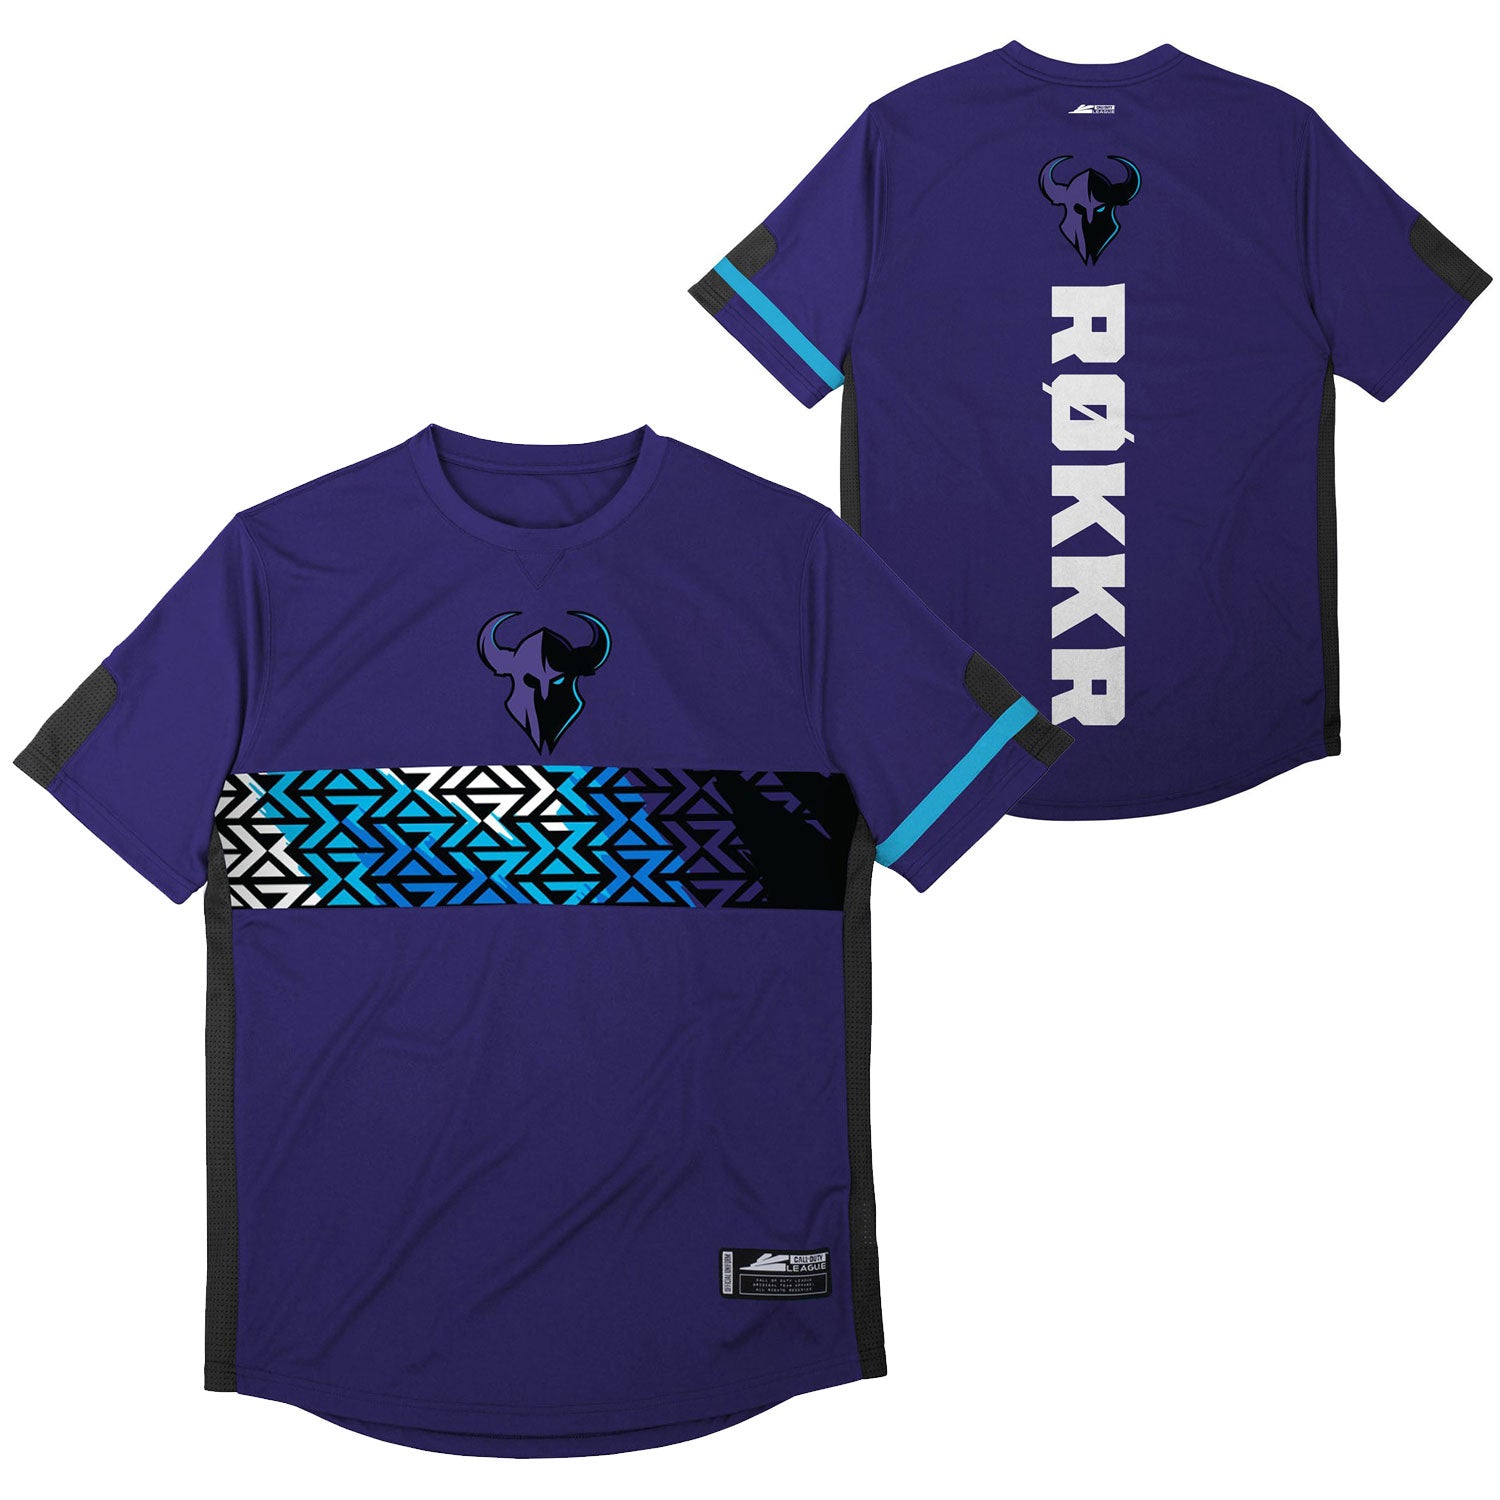 Minnesota Rokkr Purple Pro Jersey - front and back view